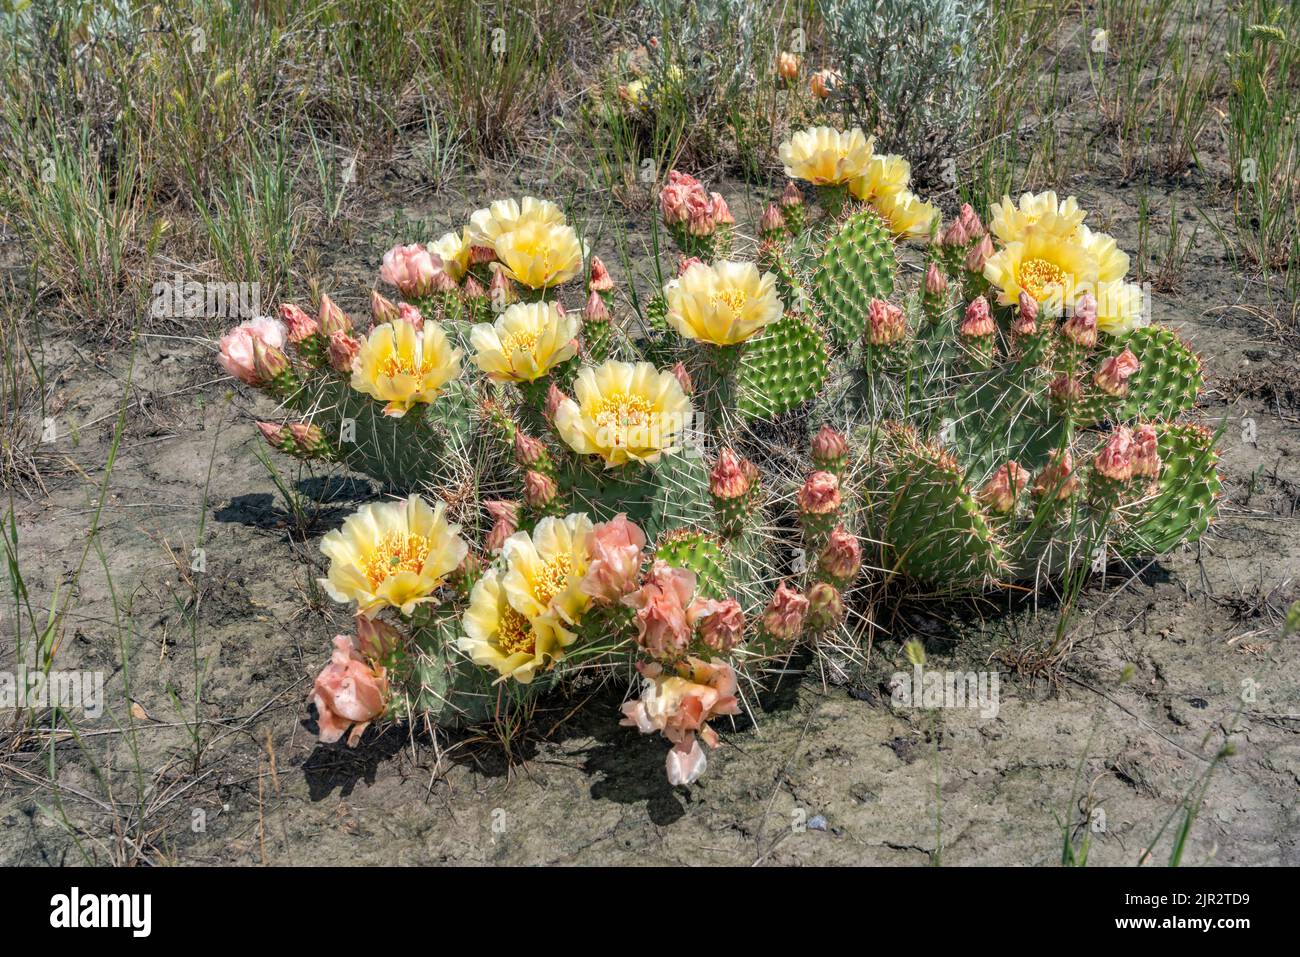 The prickly pear cactus blooming in Grasslands National Park in southern Saskatchewan, Canada. Stock Photo